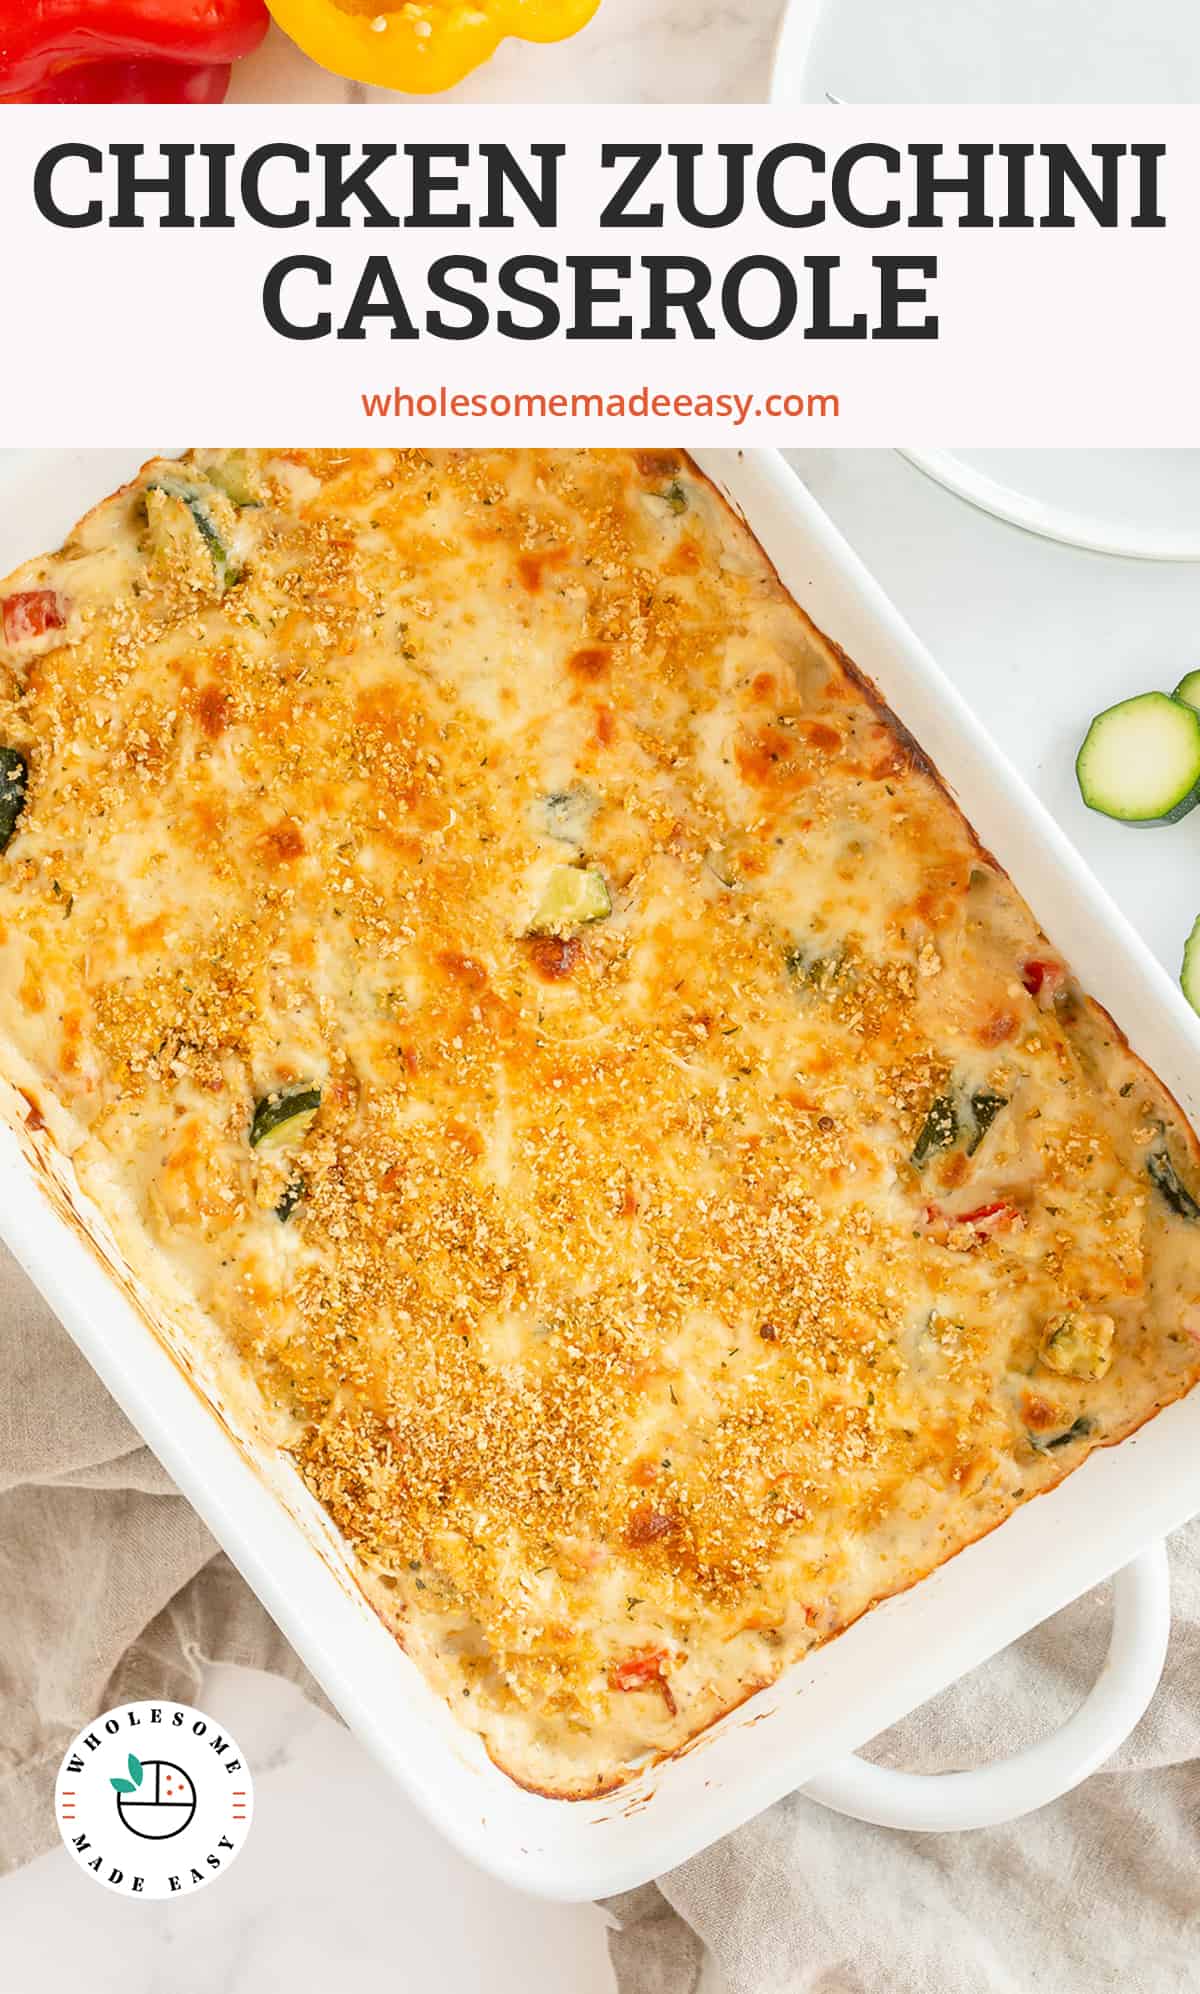 An over the top shot of Chicken Zucchini Casserole in a white dish with overlay text.